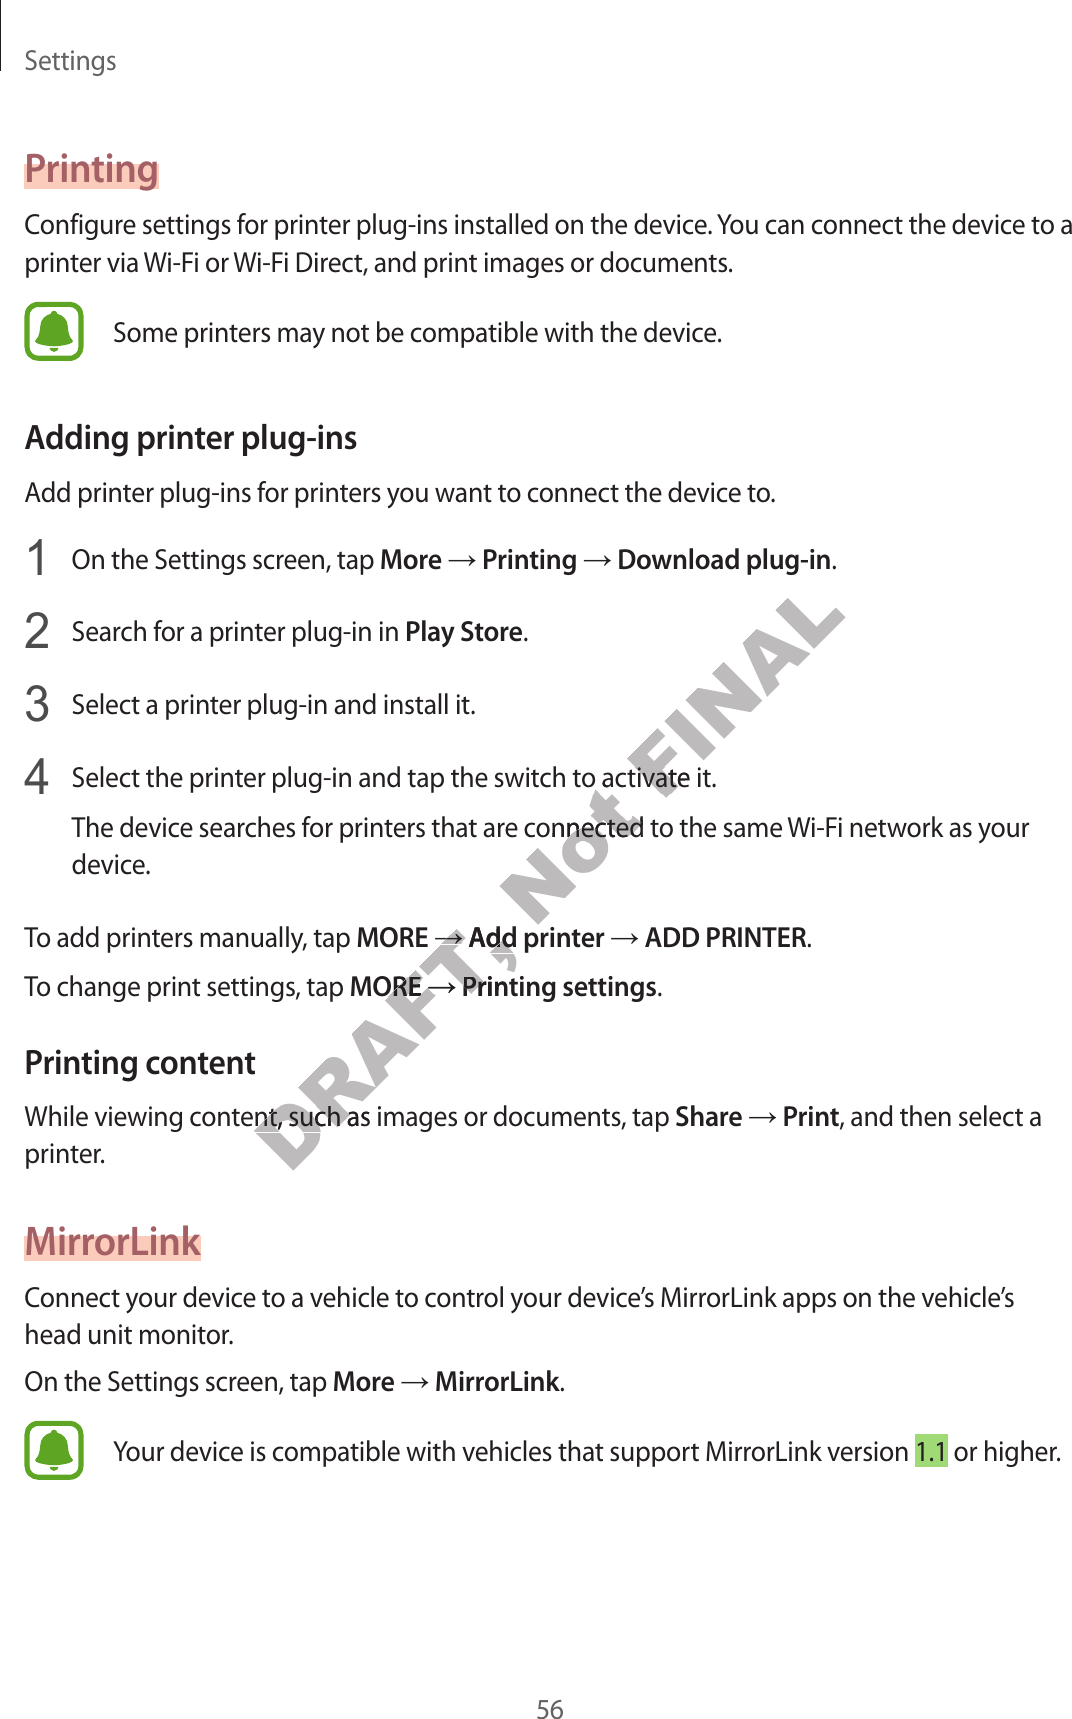 Settings56PrintingConfigure settings for printer plug-ins installed on the device. You can connect the device to a printer via Wi-Fi or Wi-Fi Direct, and print images or documents.Some printers may not be compatible with the device.Adding printer plug-insAdd printer plug-ins for printers you want to connect the device to.1  On the Settings screen, tap More → Printing → Download plug-in.2  Search for a printer plug-in in Play Store.3  Select a printer plug-in and install it.4  Select the printer plug-in and tap the switch to activate it.The device searches for printers that are connected to the same Wi-Fi network as your device.To add printers manually, tap MORE → Add printer → ADD PRINTER.To change print settings, tap MORE → Printing settings.Printing contentWhile viewing content, such as images or documents, tap Share → Print, and then select a printer.MirrorLinkConnect your device to a vehicle to control your device’s MirrorLink apps on the vehicle’s head unit monitor.On the Settings screen, tap More → MirrorLink.Your device is compatible with vehicles that support MirrorLink version 1.1 or higher.DRAFT, →→Add prinAdd prinMOREMORE→→Printing settingsPrintent, such as images or documentent, such as images or documenNot ch to acch to ace connected tonnected tFINALo activate ito activate it